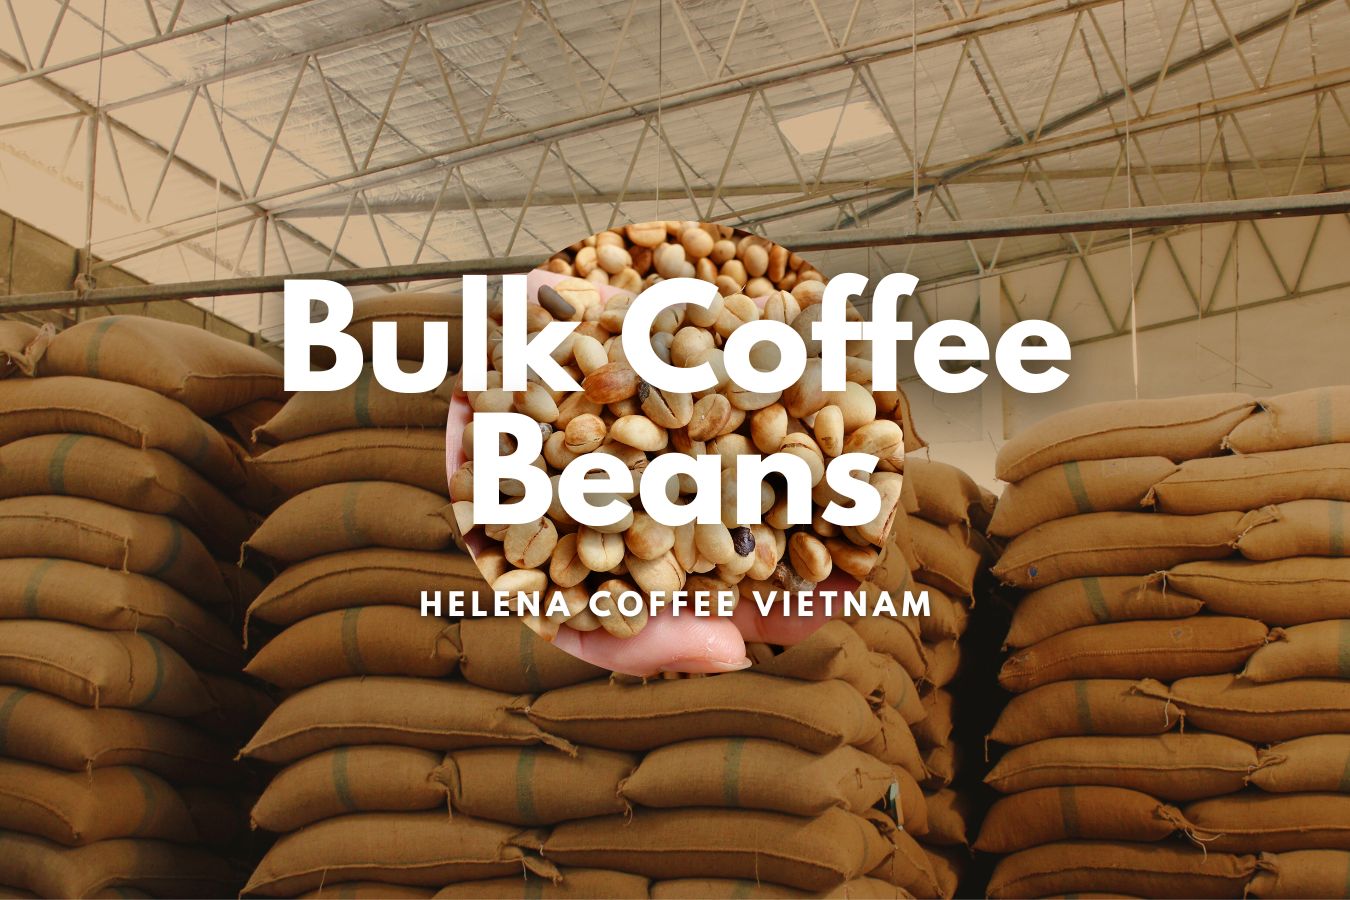 https://helenacoffee.vn/wp-content/uploads/2023/04/Bulk-Coffee-Beans-The-Comprehensive-Guide-to-Coffee-Wholesale-for-Businesses-and-Resellers.jpg